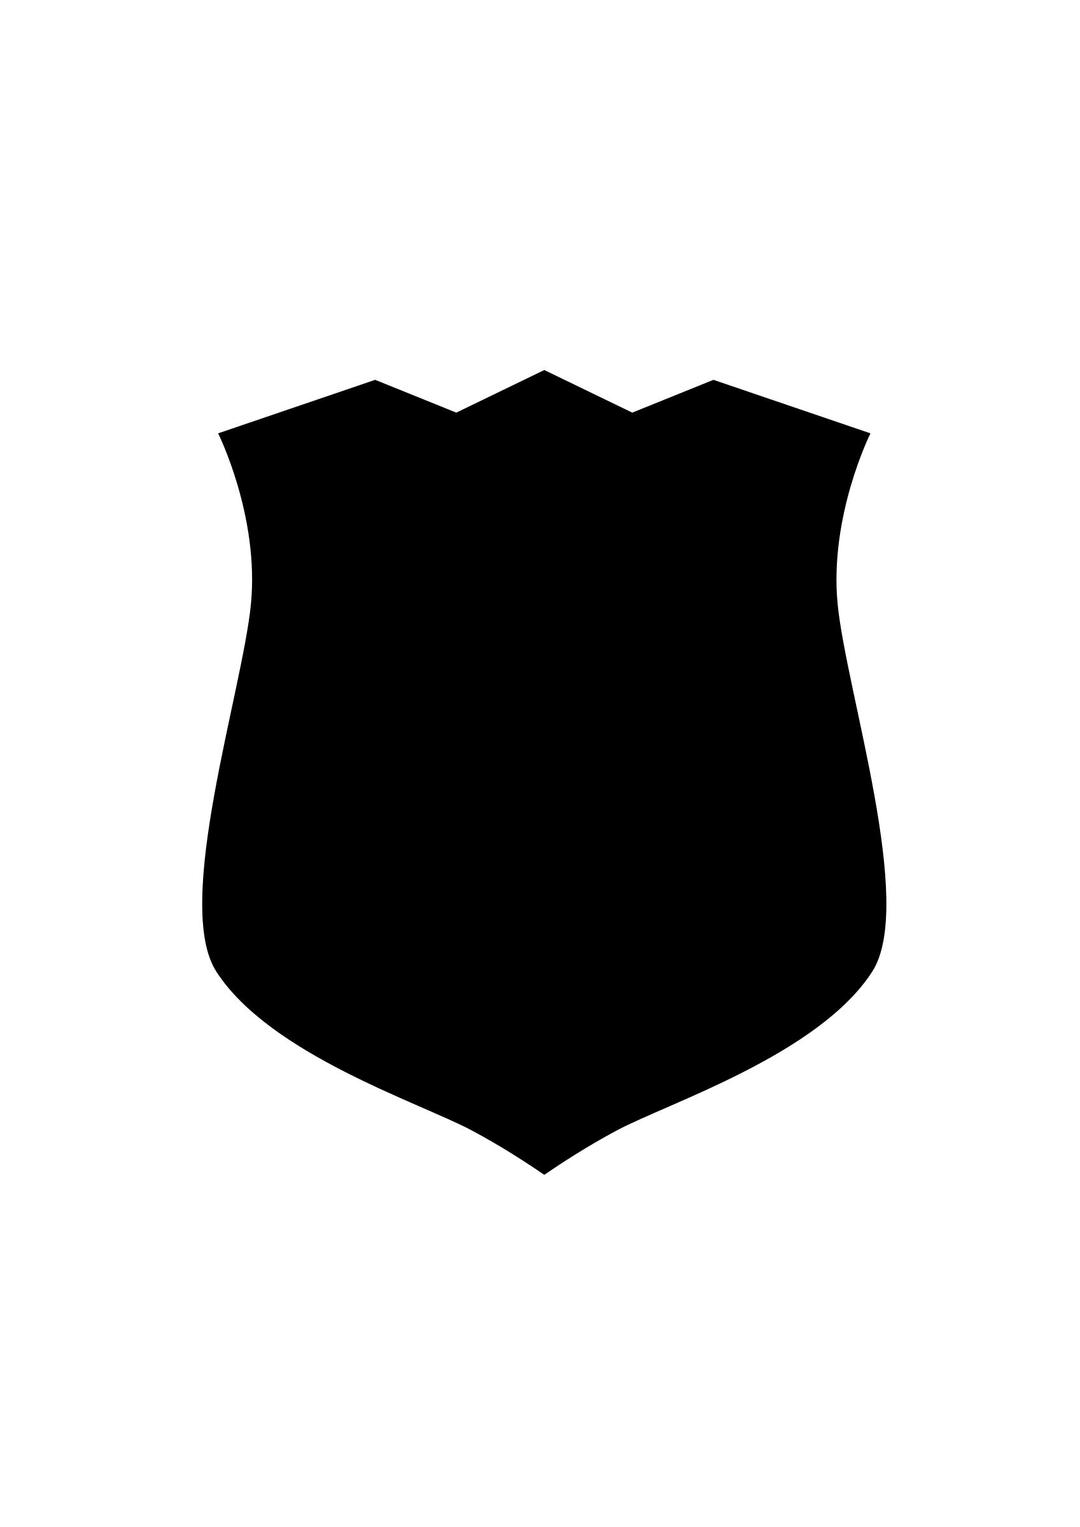 Eared shield 2 png transparent